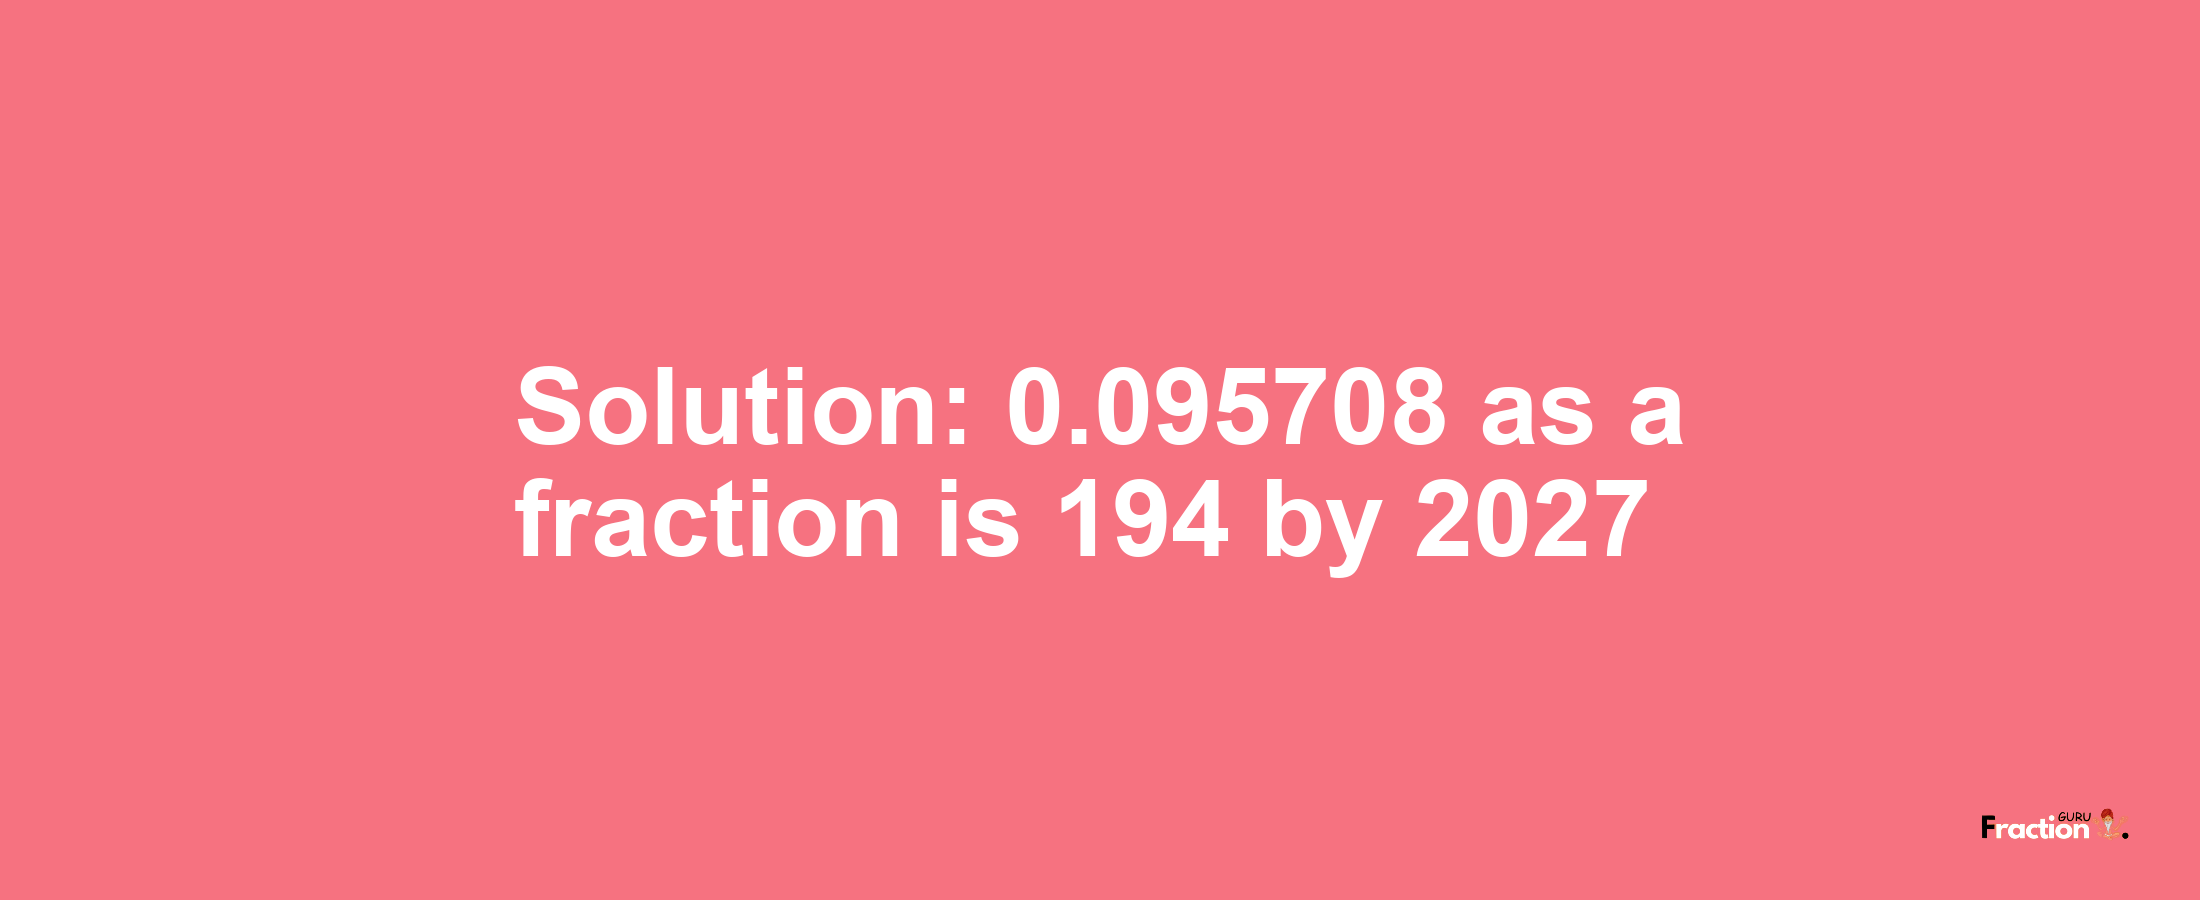 Solution:0.095708 as a fraction is 194/2027